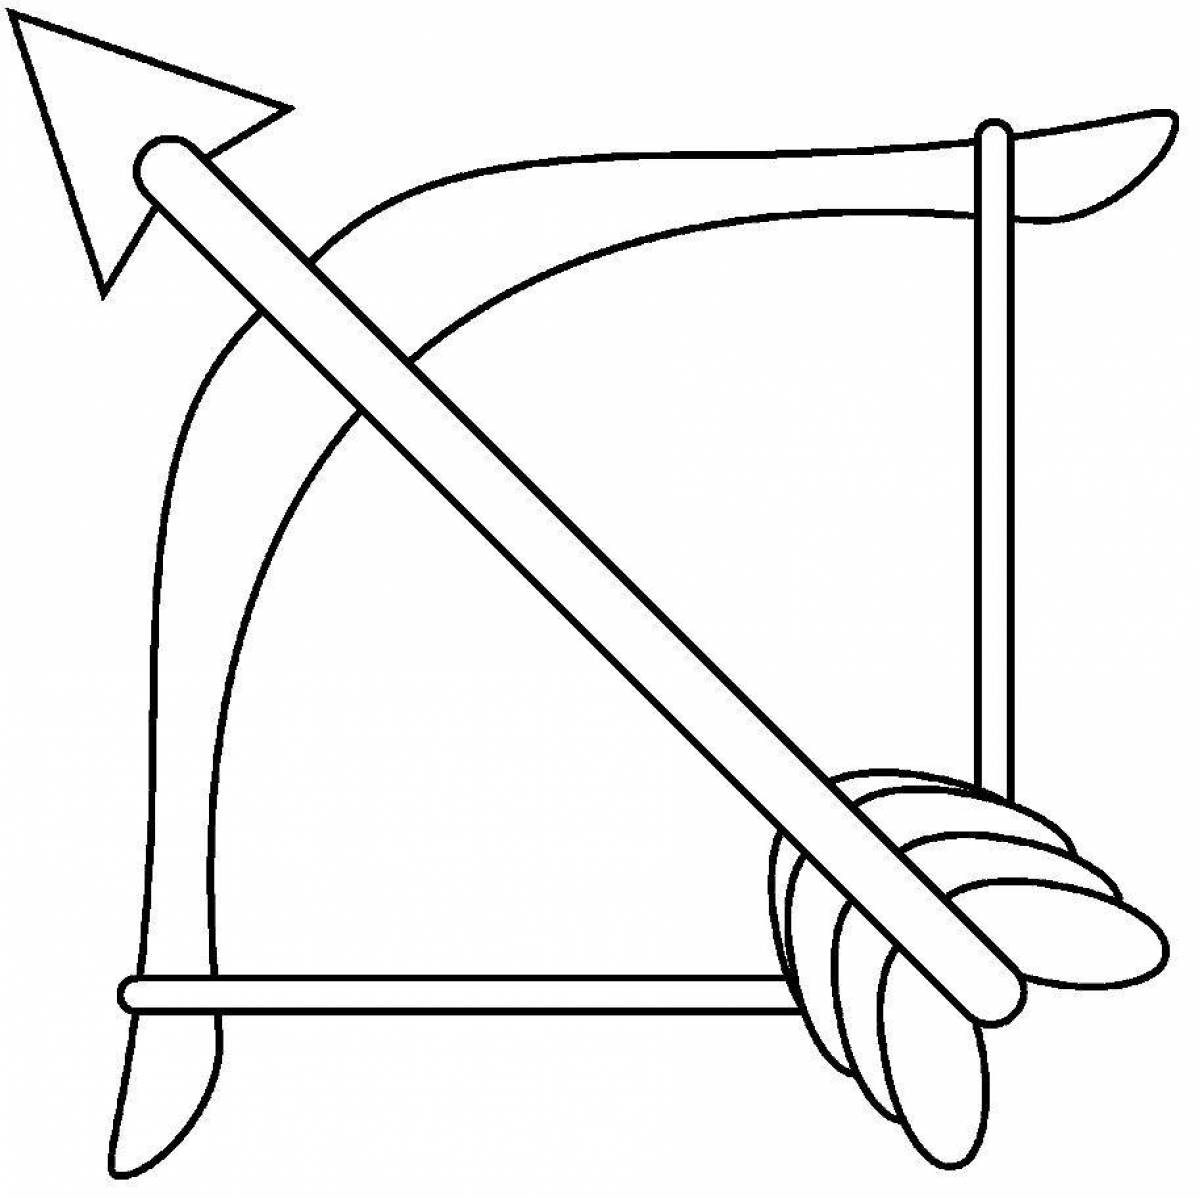 Gorgeous bow and arrow coloring book